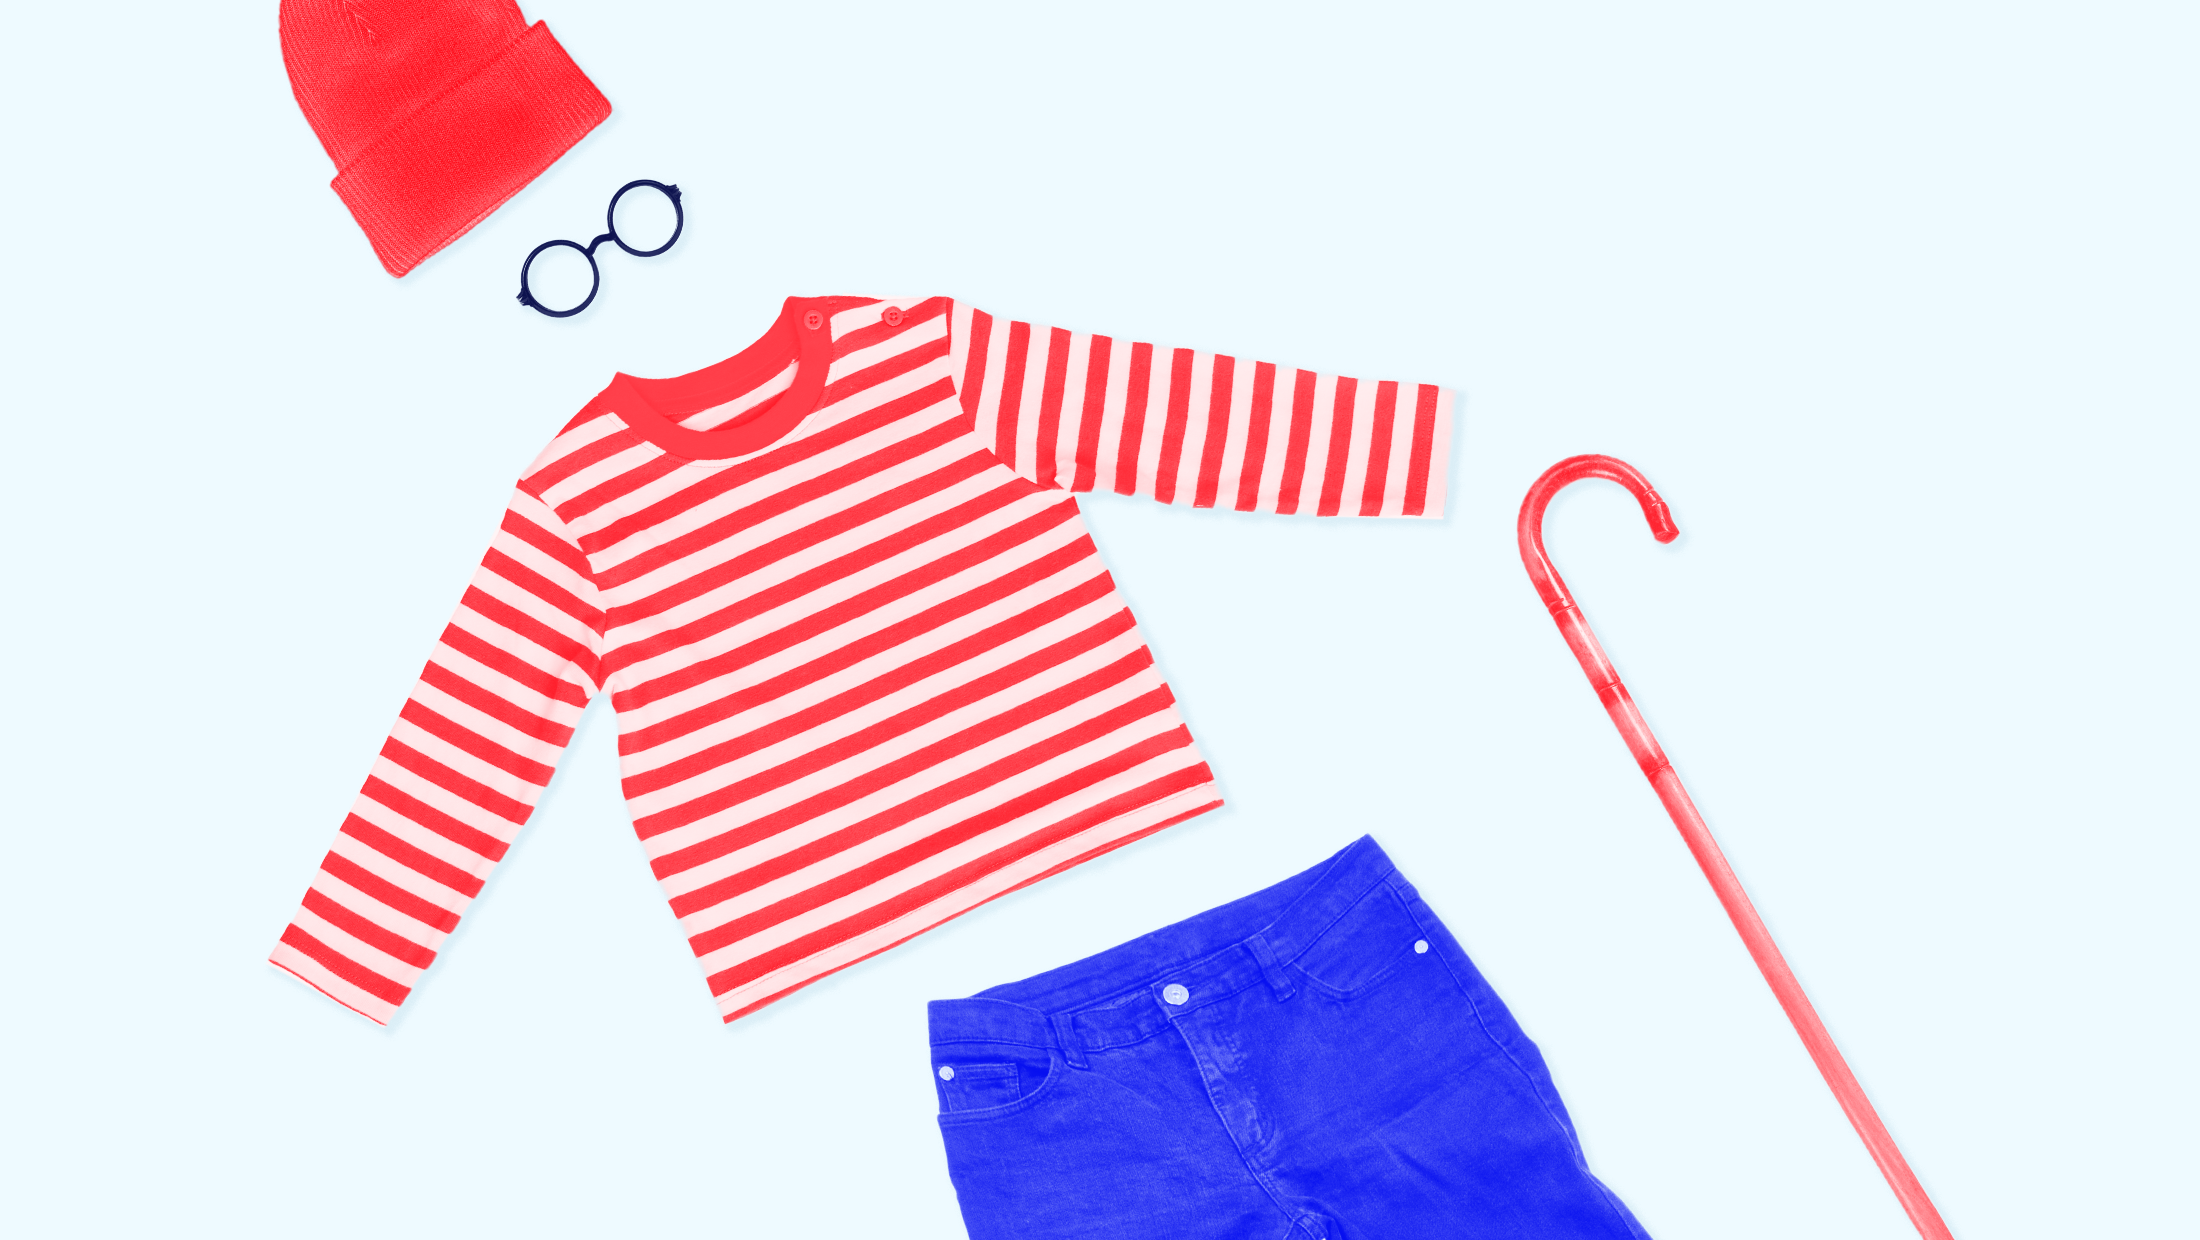 Light blue background with a red hat, black circular glasses, a red and white striped "Where's Waldo?" long sleeve shirt, a blue pair of pants, and a red cane all laid out separately.